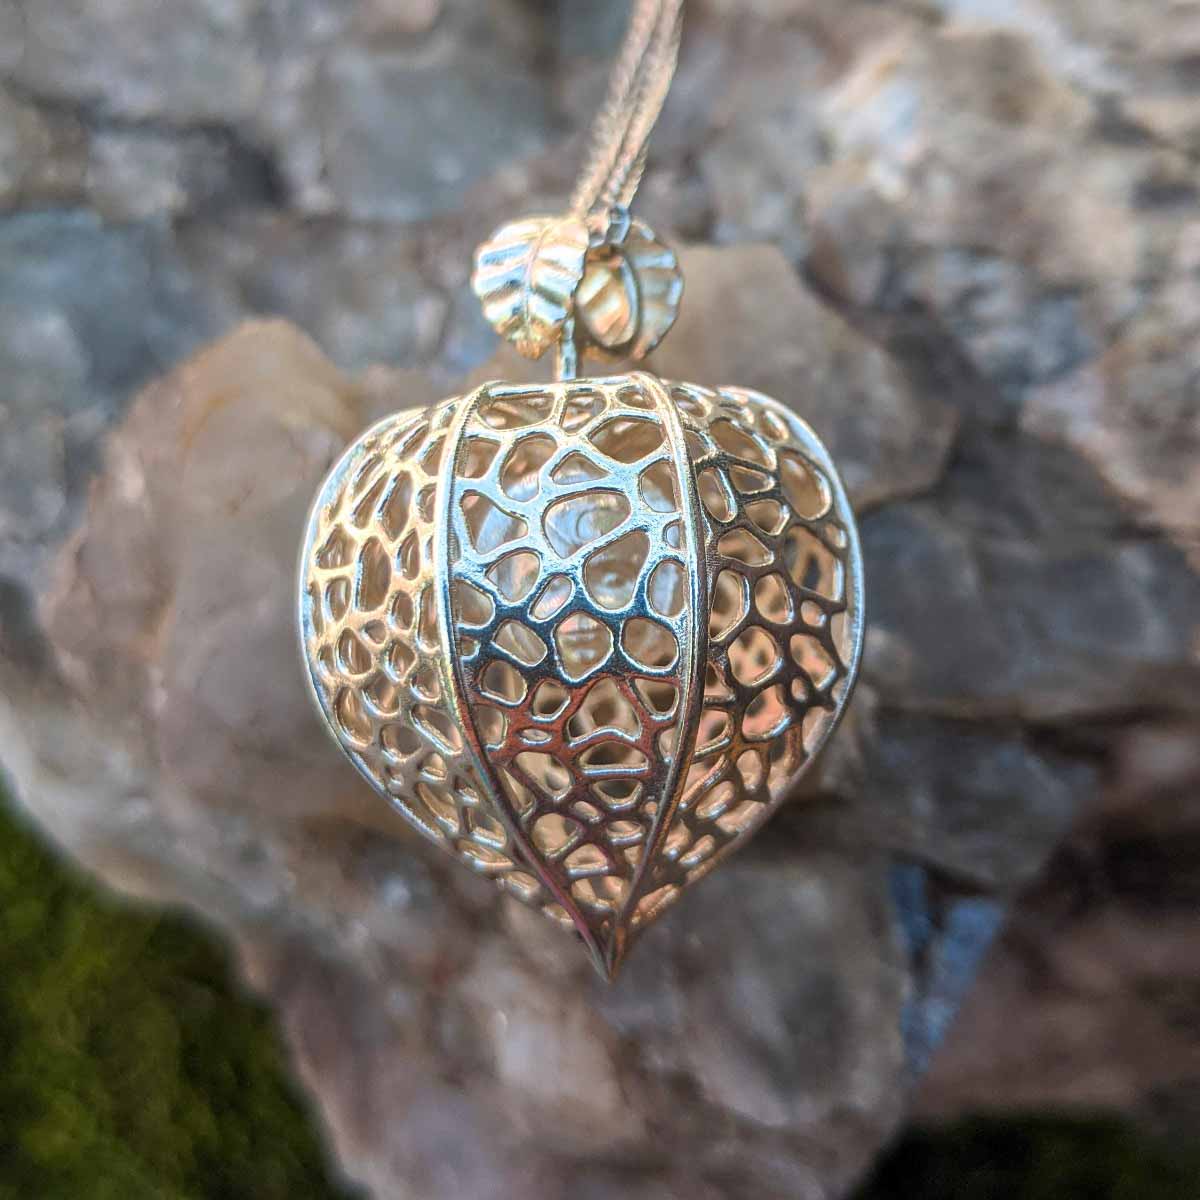 Chinese Lantern with Soul Seed Pendant